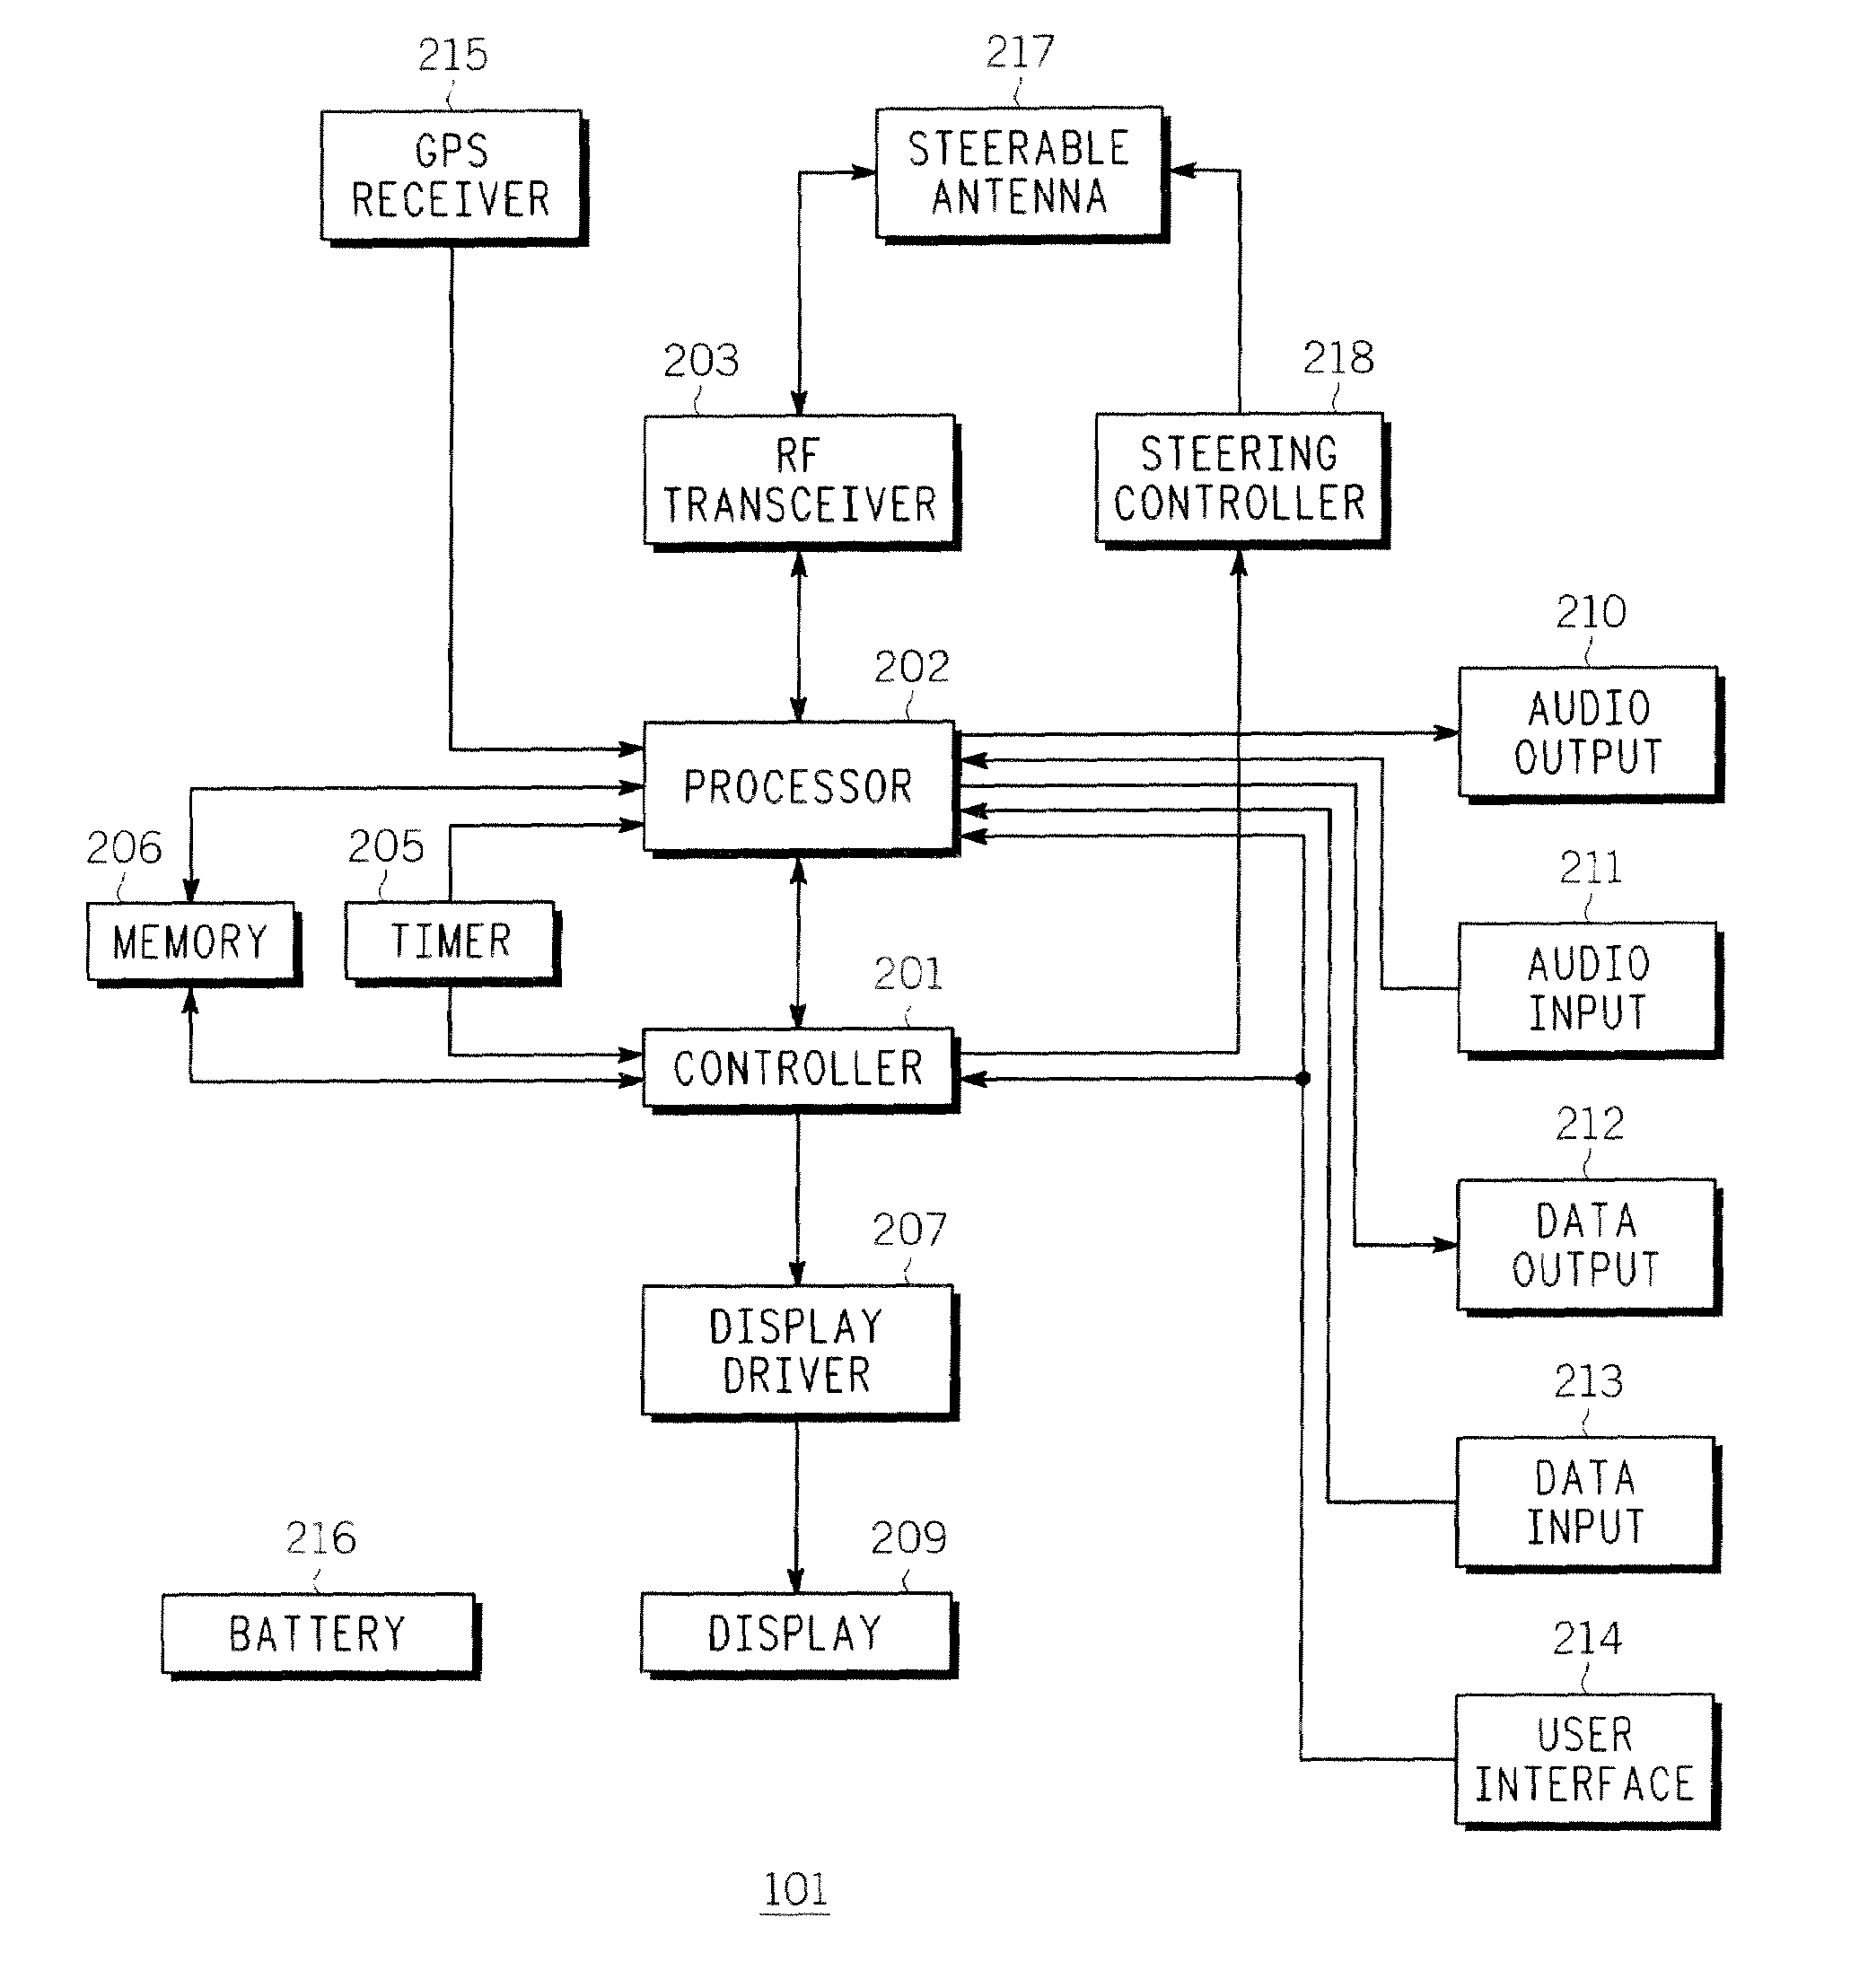 Mobile station, system and method for use in wireless communications